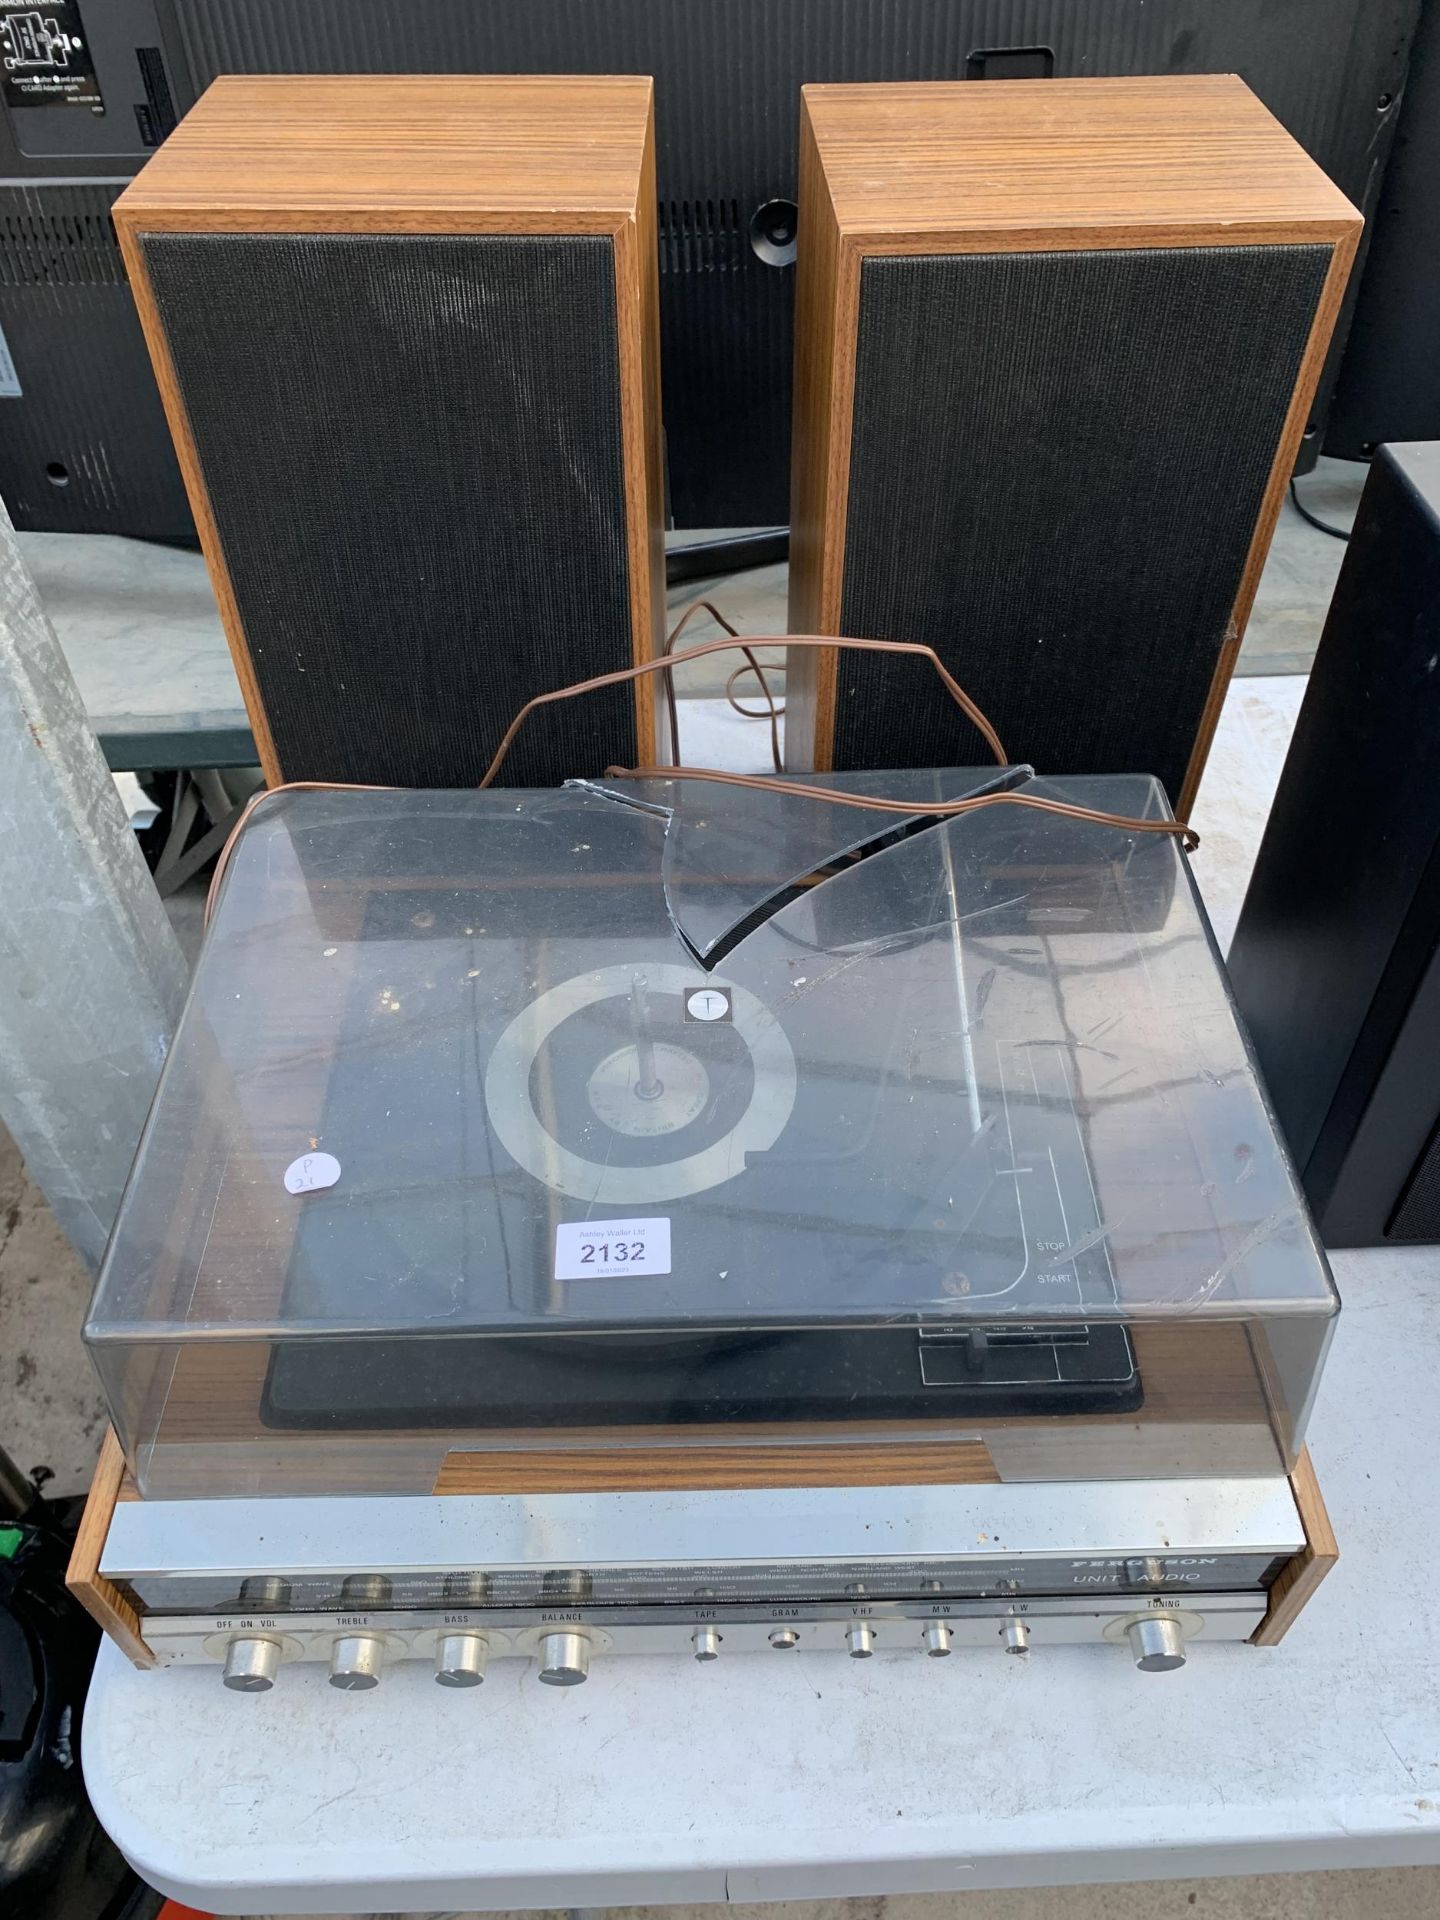 A FERGUSON RECORD PLAYER AND A PAIR OF WOODEN CASED SPEAKERS